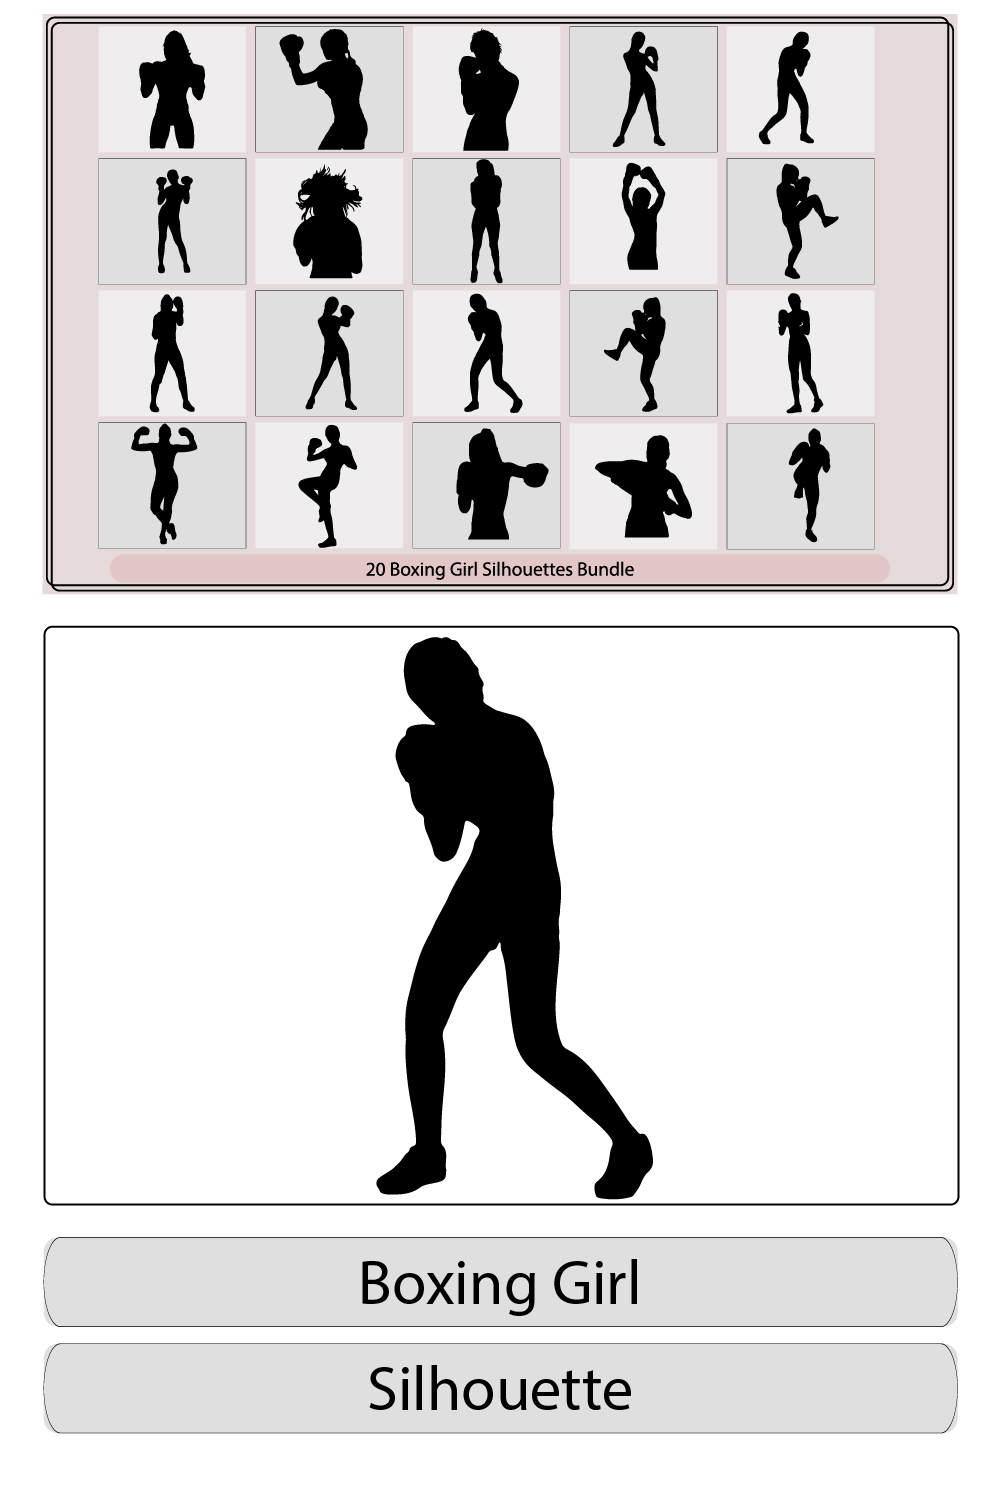 boxer woman silhouette,Template Girl Woman Boxing silhouette,boxer woman silhouette in black pinterest preview image.